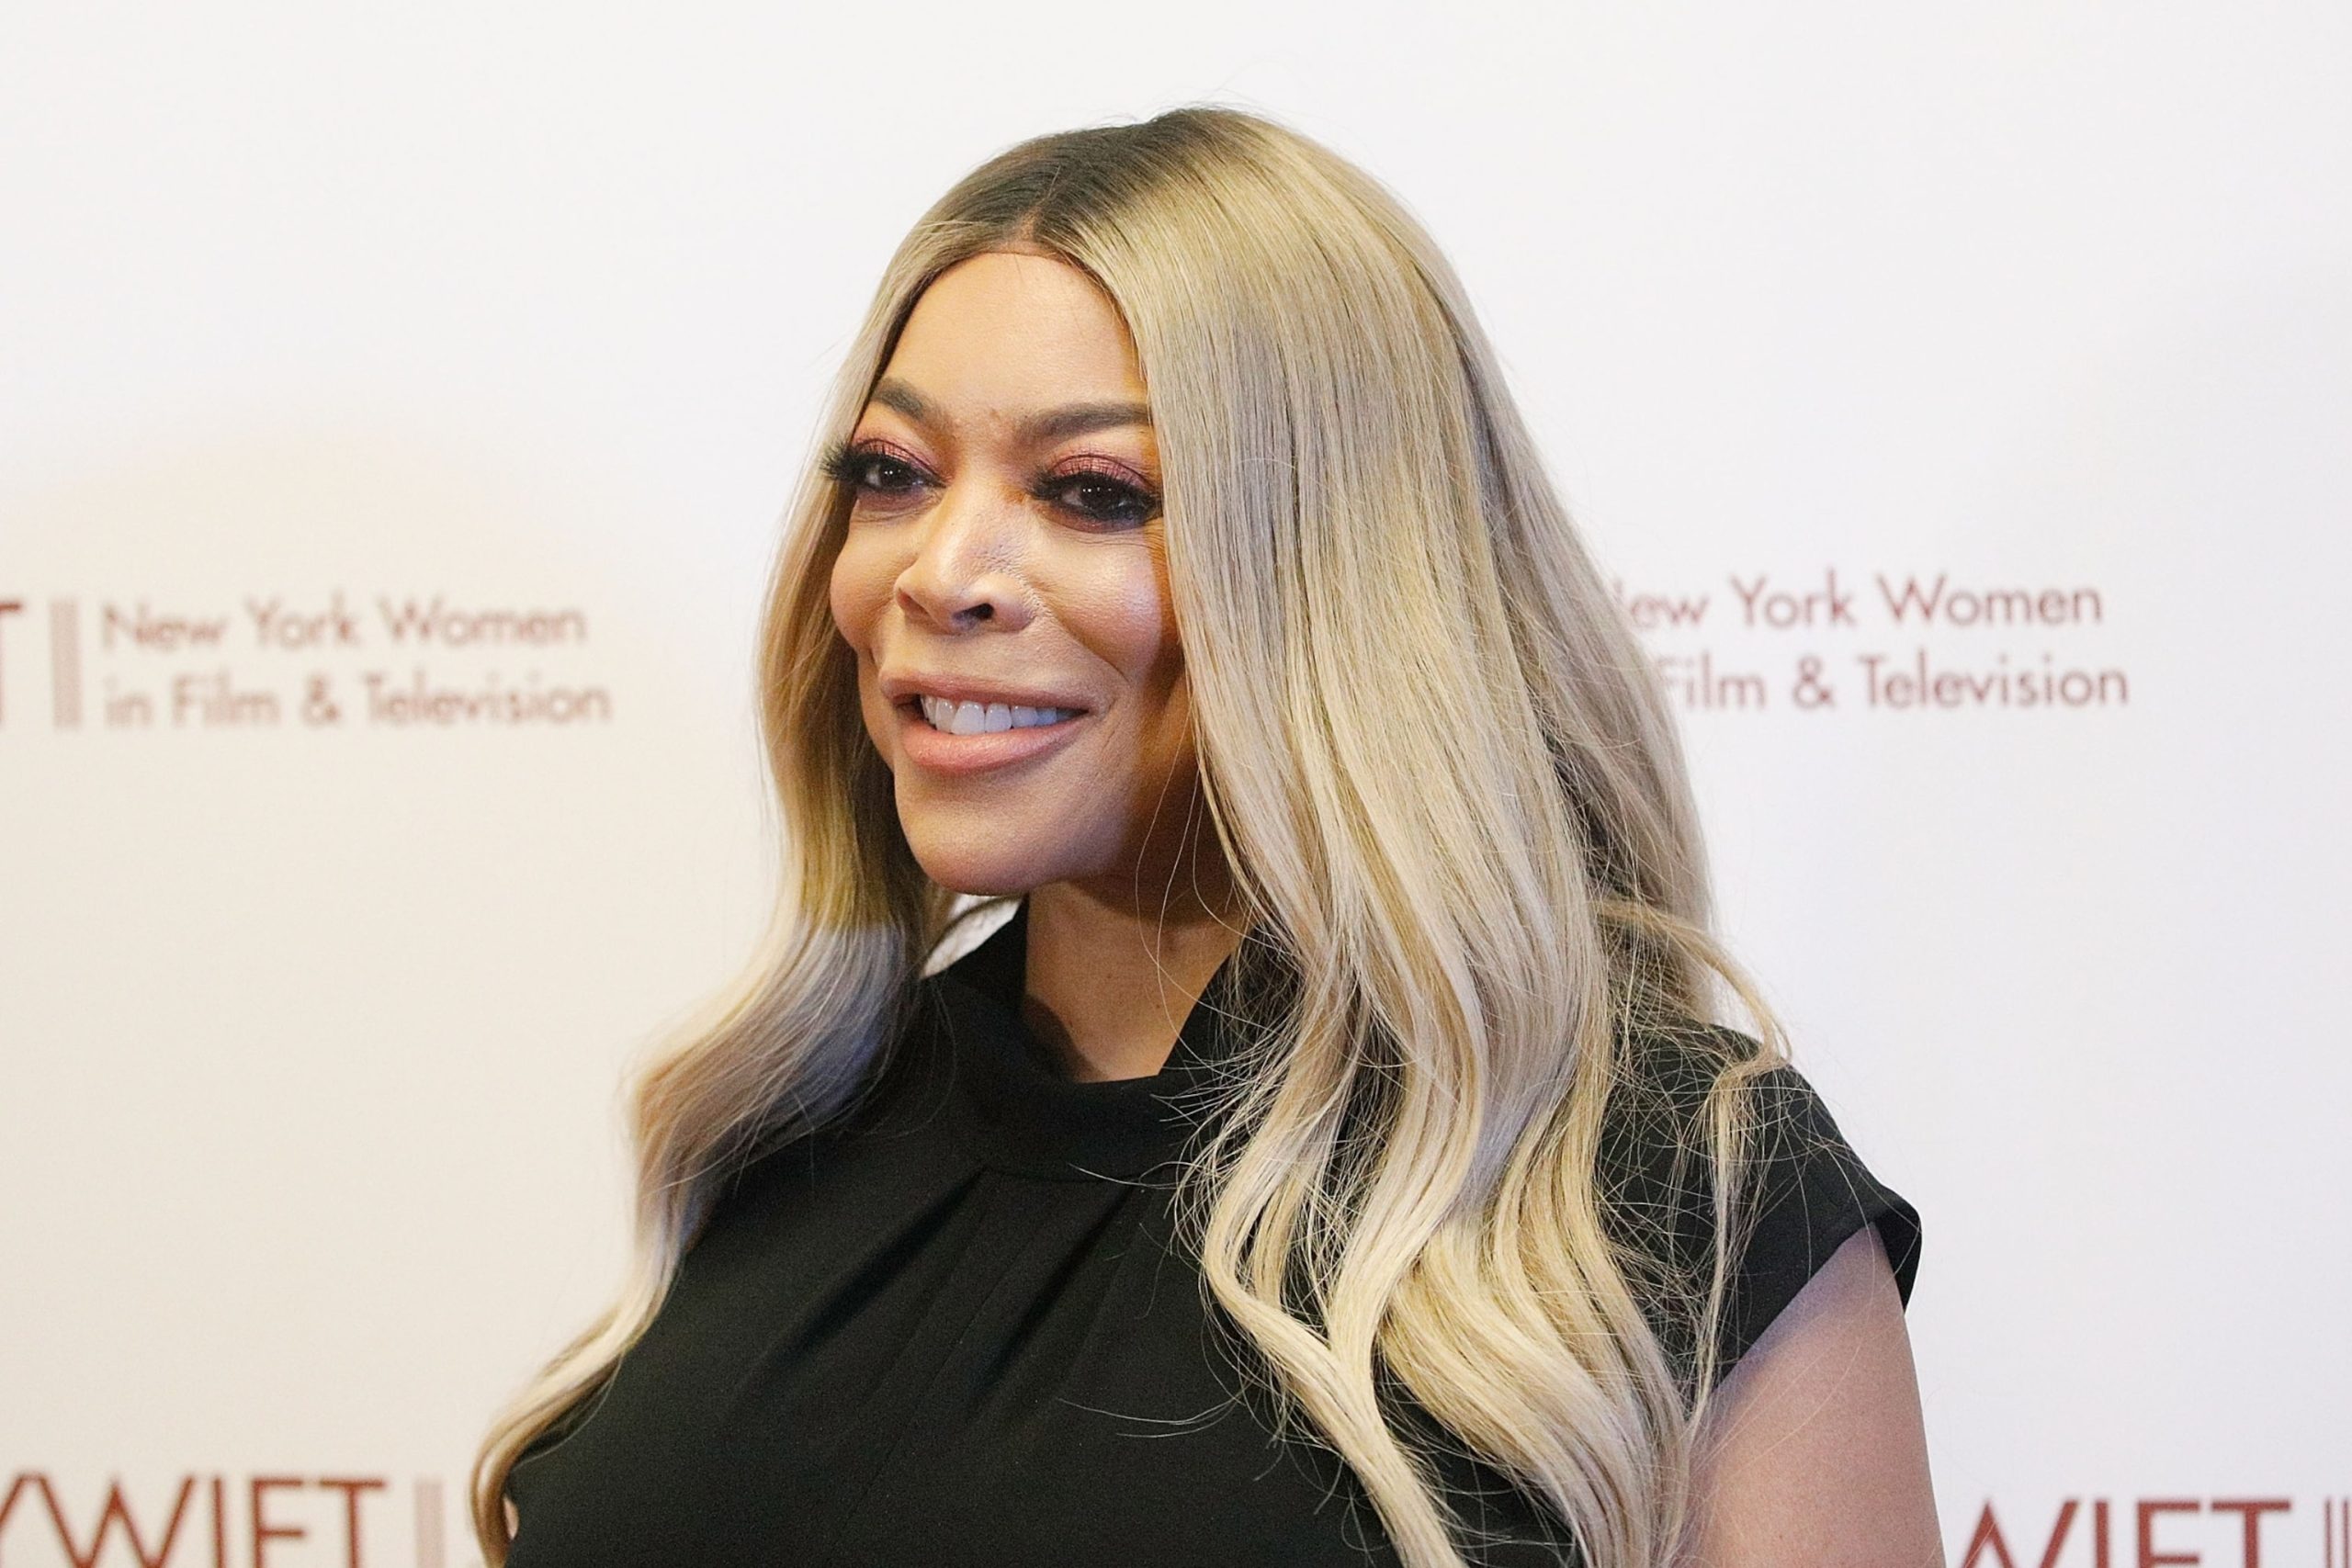 Wendy Williams' Diagnosis: Primary Progressive Aphasia and Frontotemporal Dementia